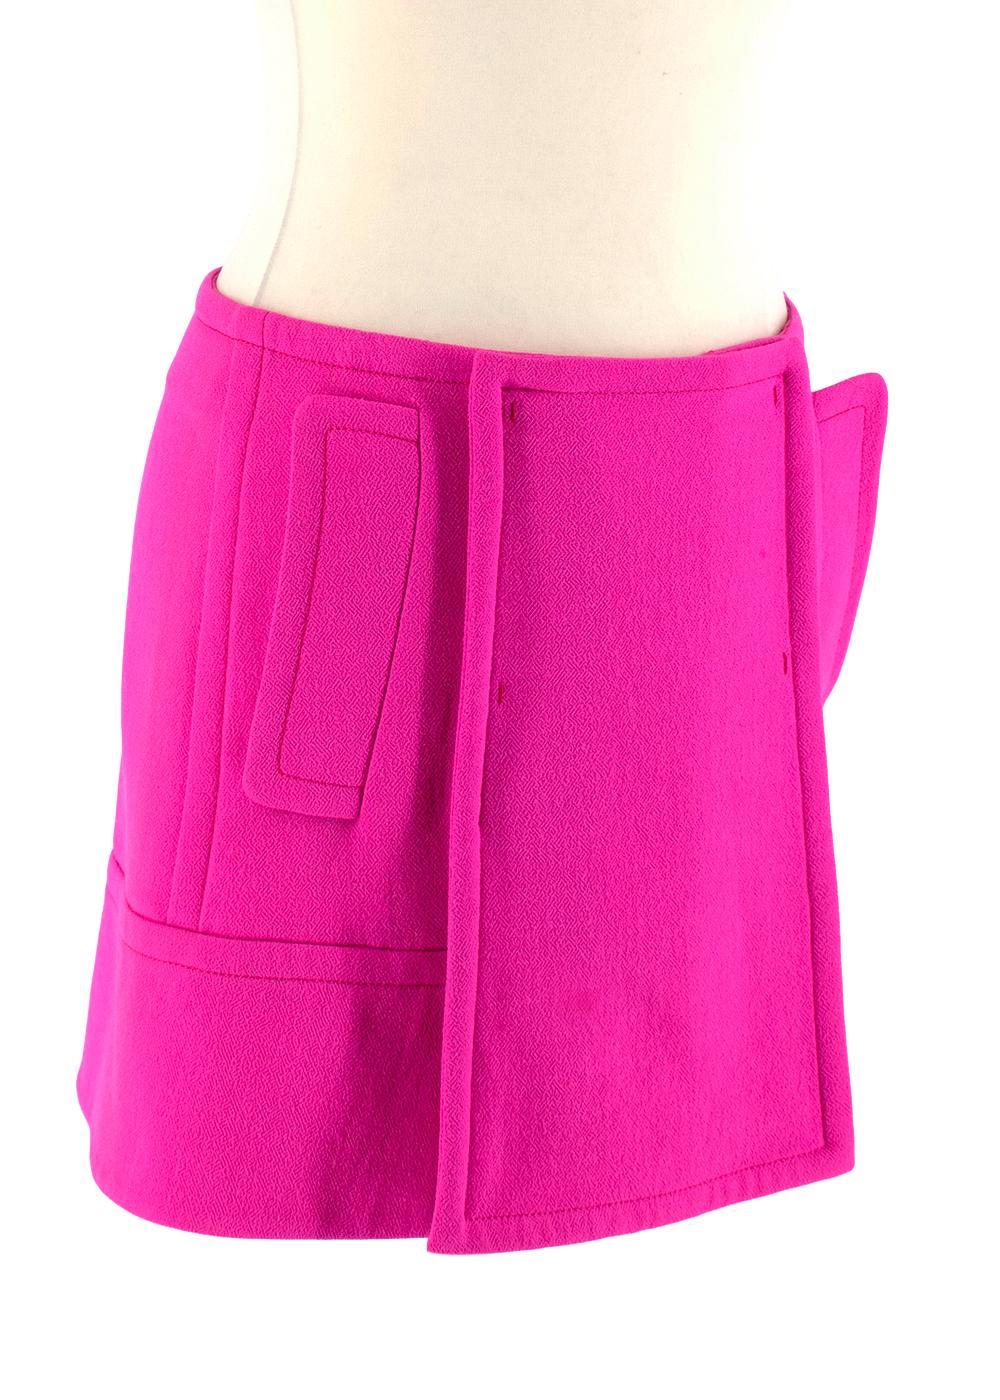 Prada Hot Pink Tailored Wool Wrap Front Mini Skirt

- Bold hot pink colour
- Soft wool
- Mini length 
- High waisted
- Wrap style 
- Side flap pockets 
- Concealed press-stud and eyelet front fastening 

THERE IS NO SIZE/CARE LABEL, HOWEVER BASED ON